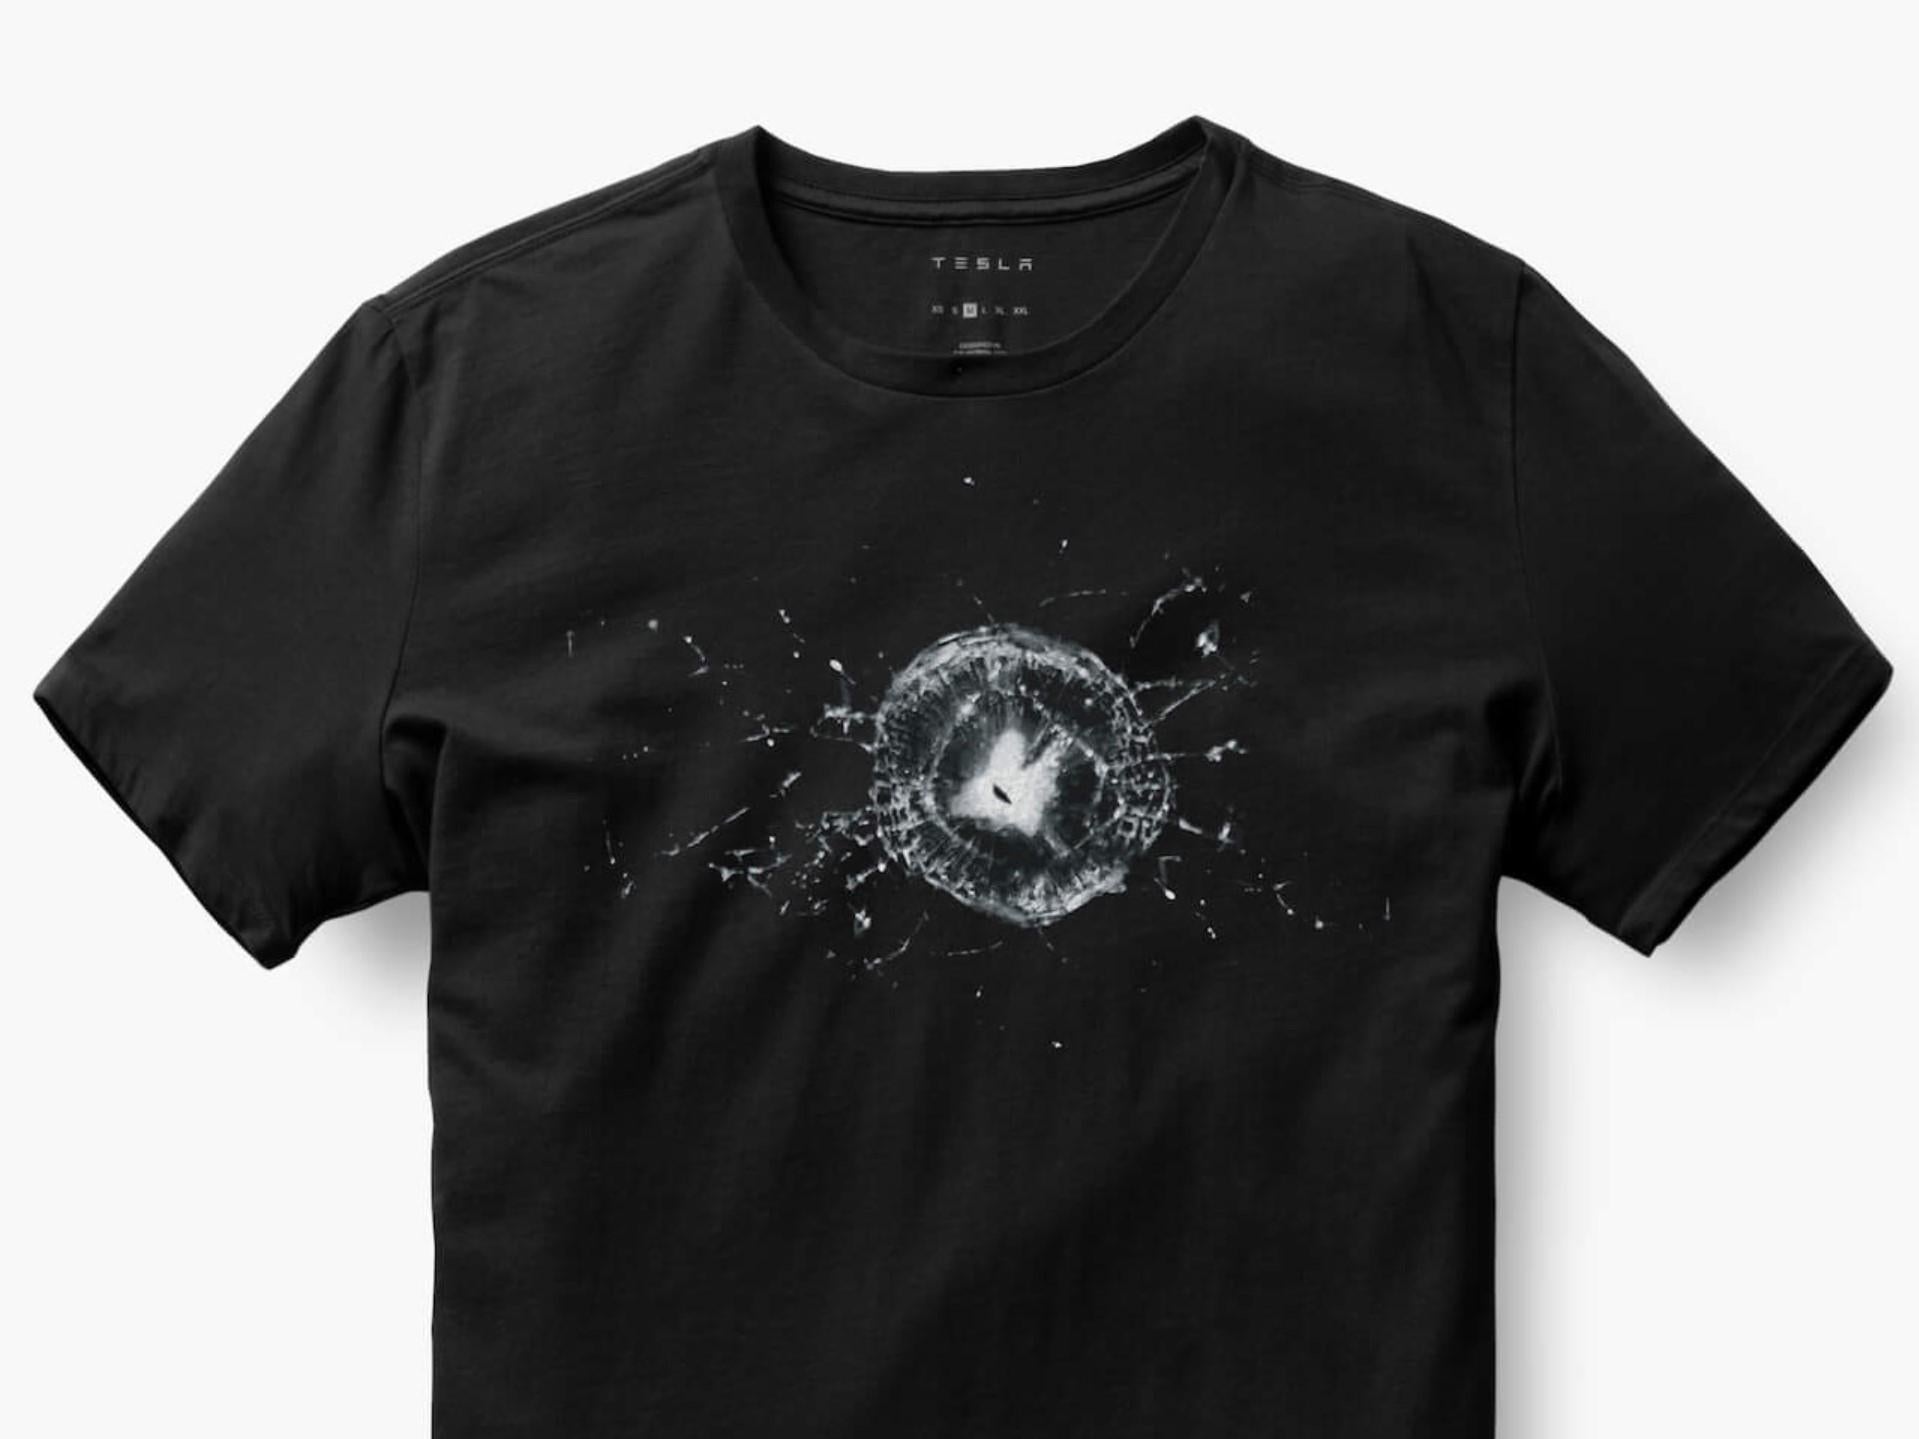 Tesla's 'Cybertruck Bulletproof Tee' features an image of the smashed window from the vehicle's unveiling